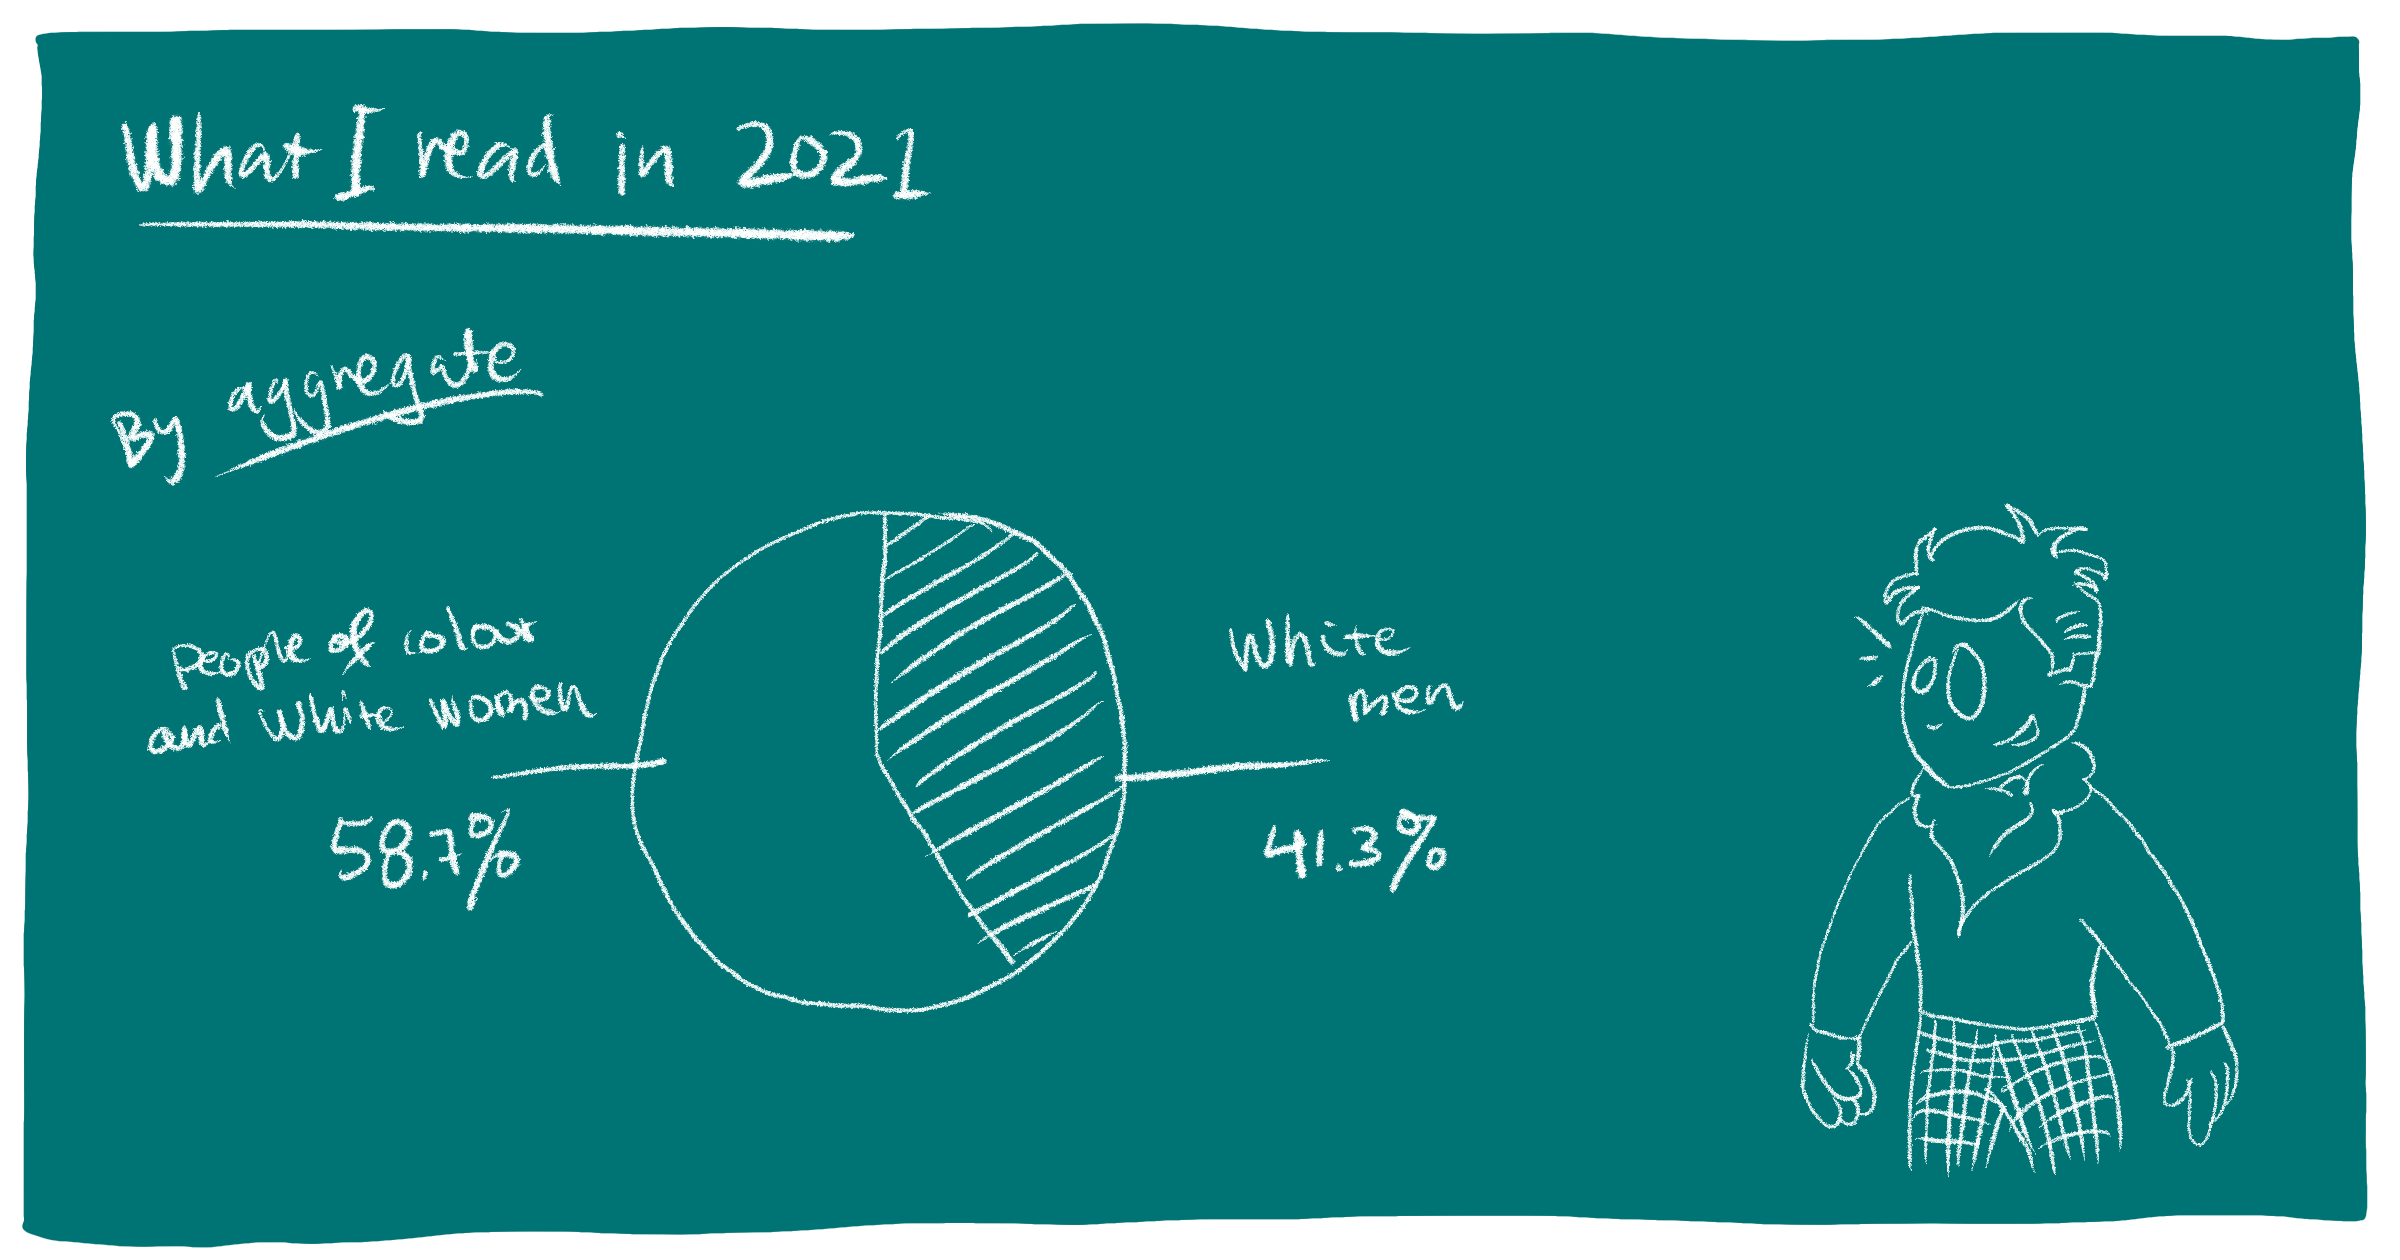 Chalkboard depicting a pie chart of the aggregate split with drawing of Disney Carlos in a corner looking happy.